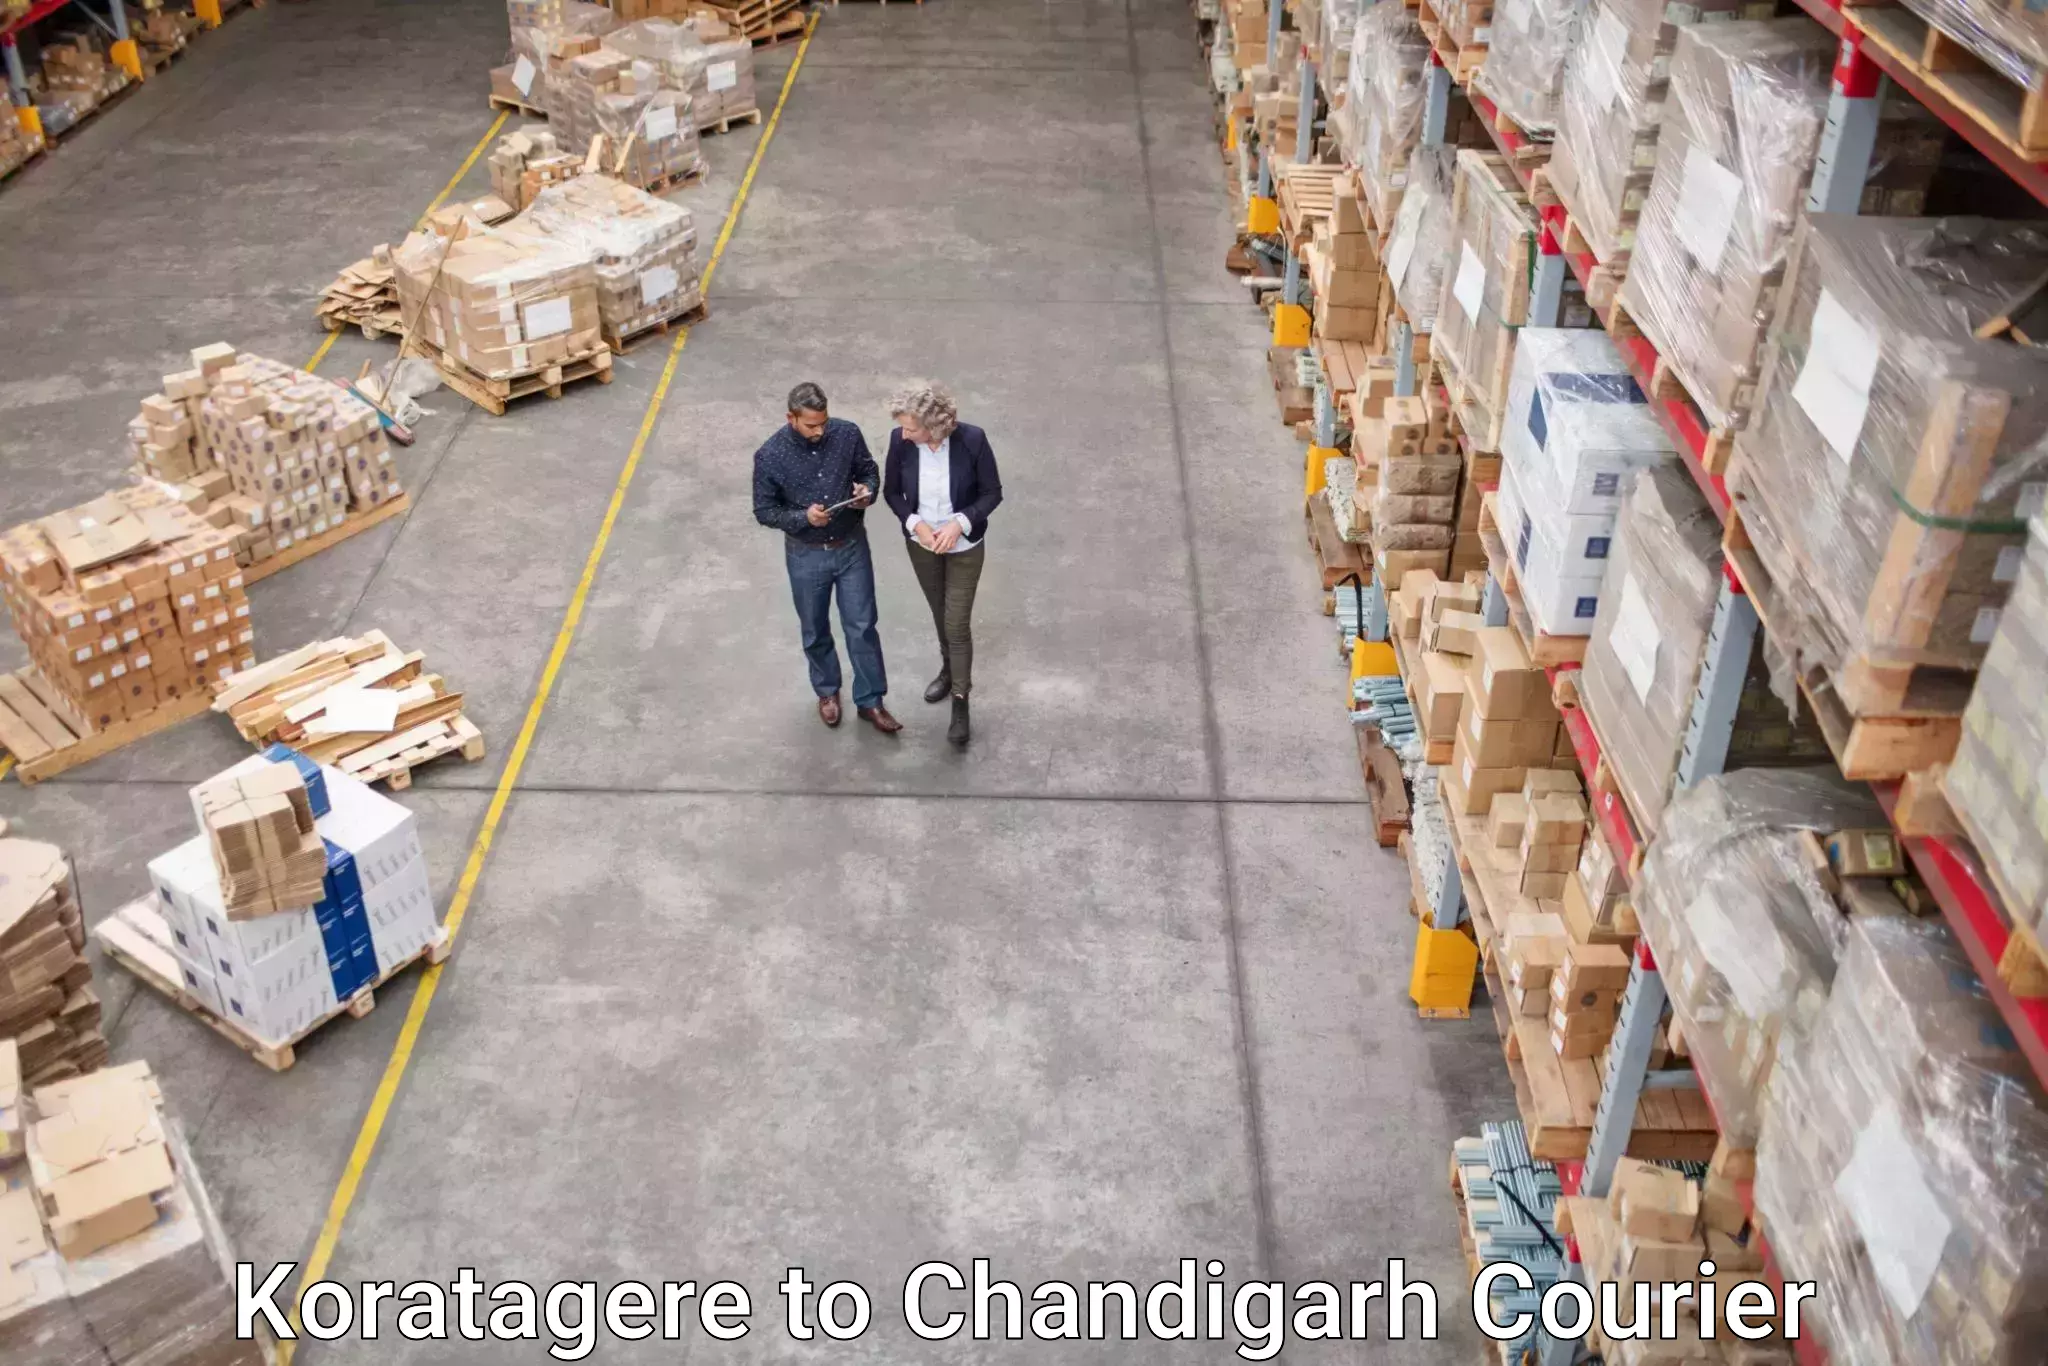 Express delivery network Koratagere to Chandigarh